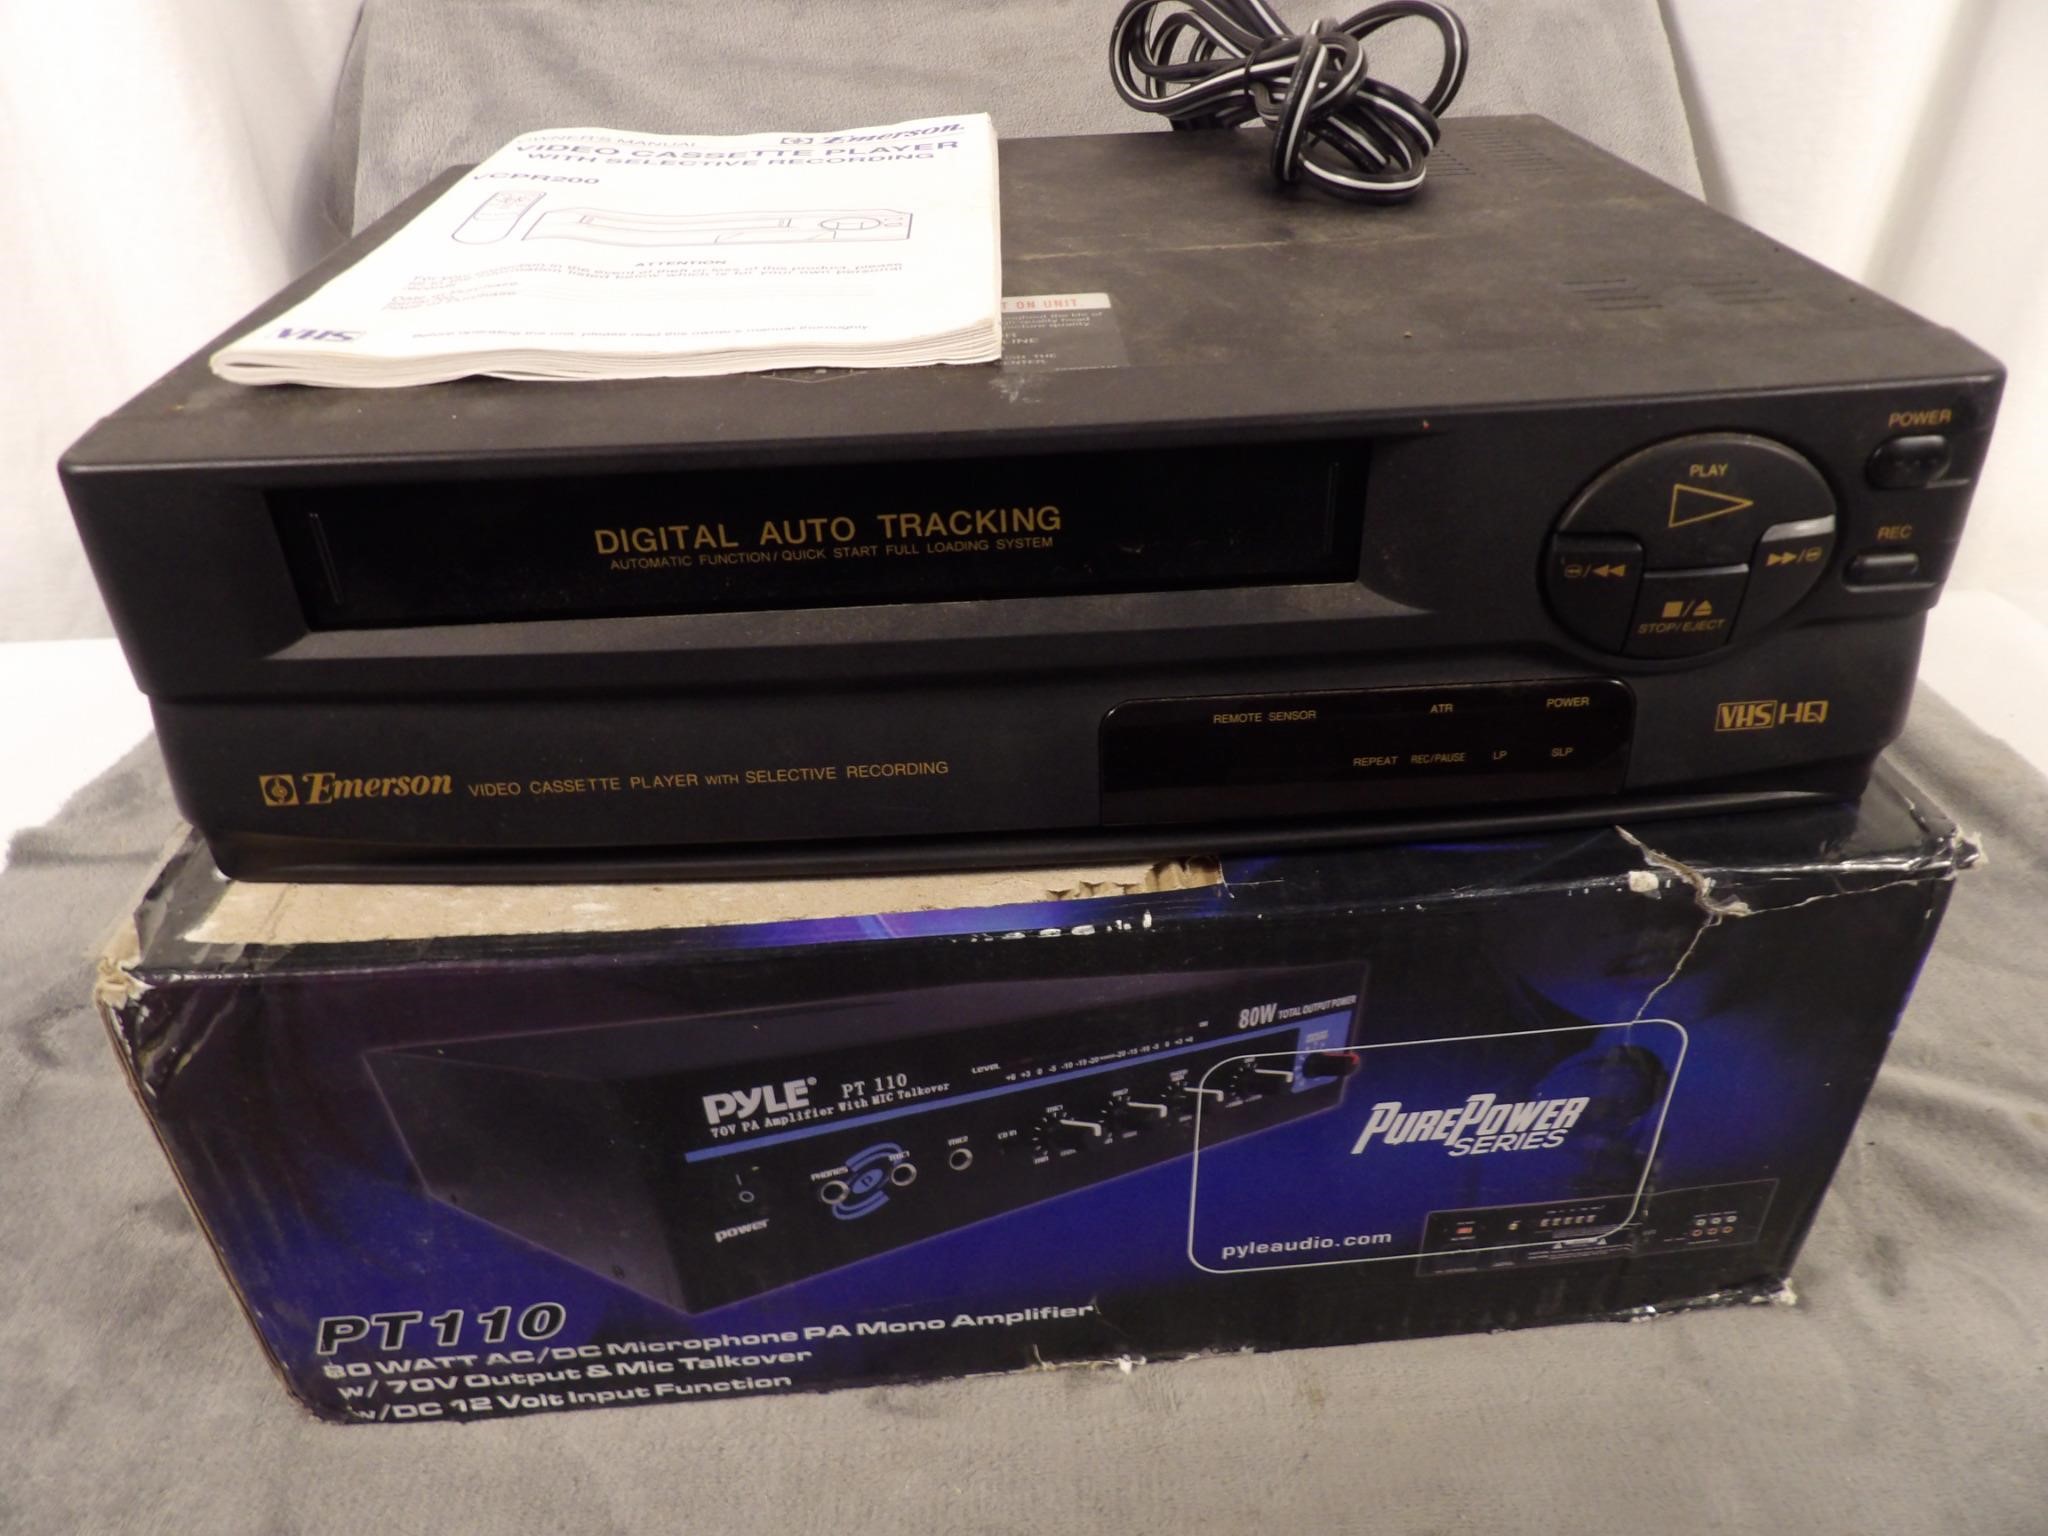 Emerson VCR and Pyle Amplifier